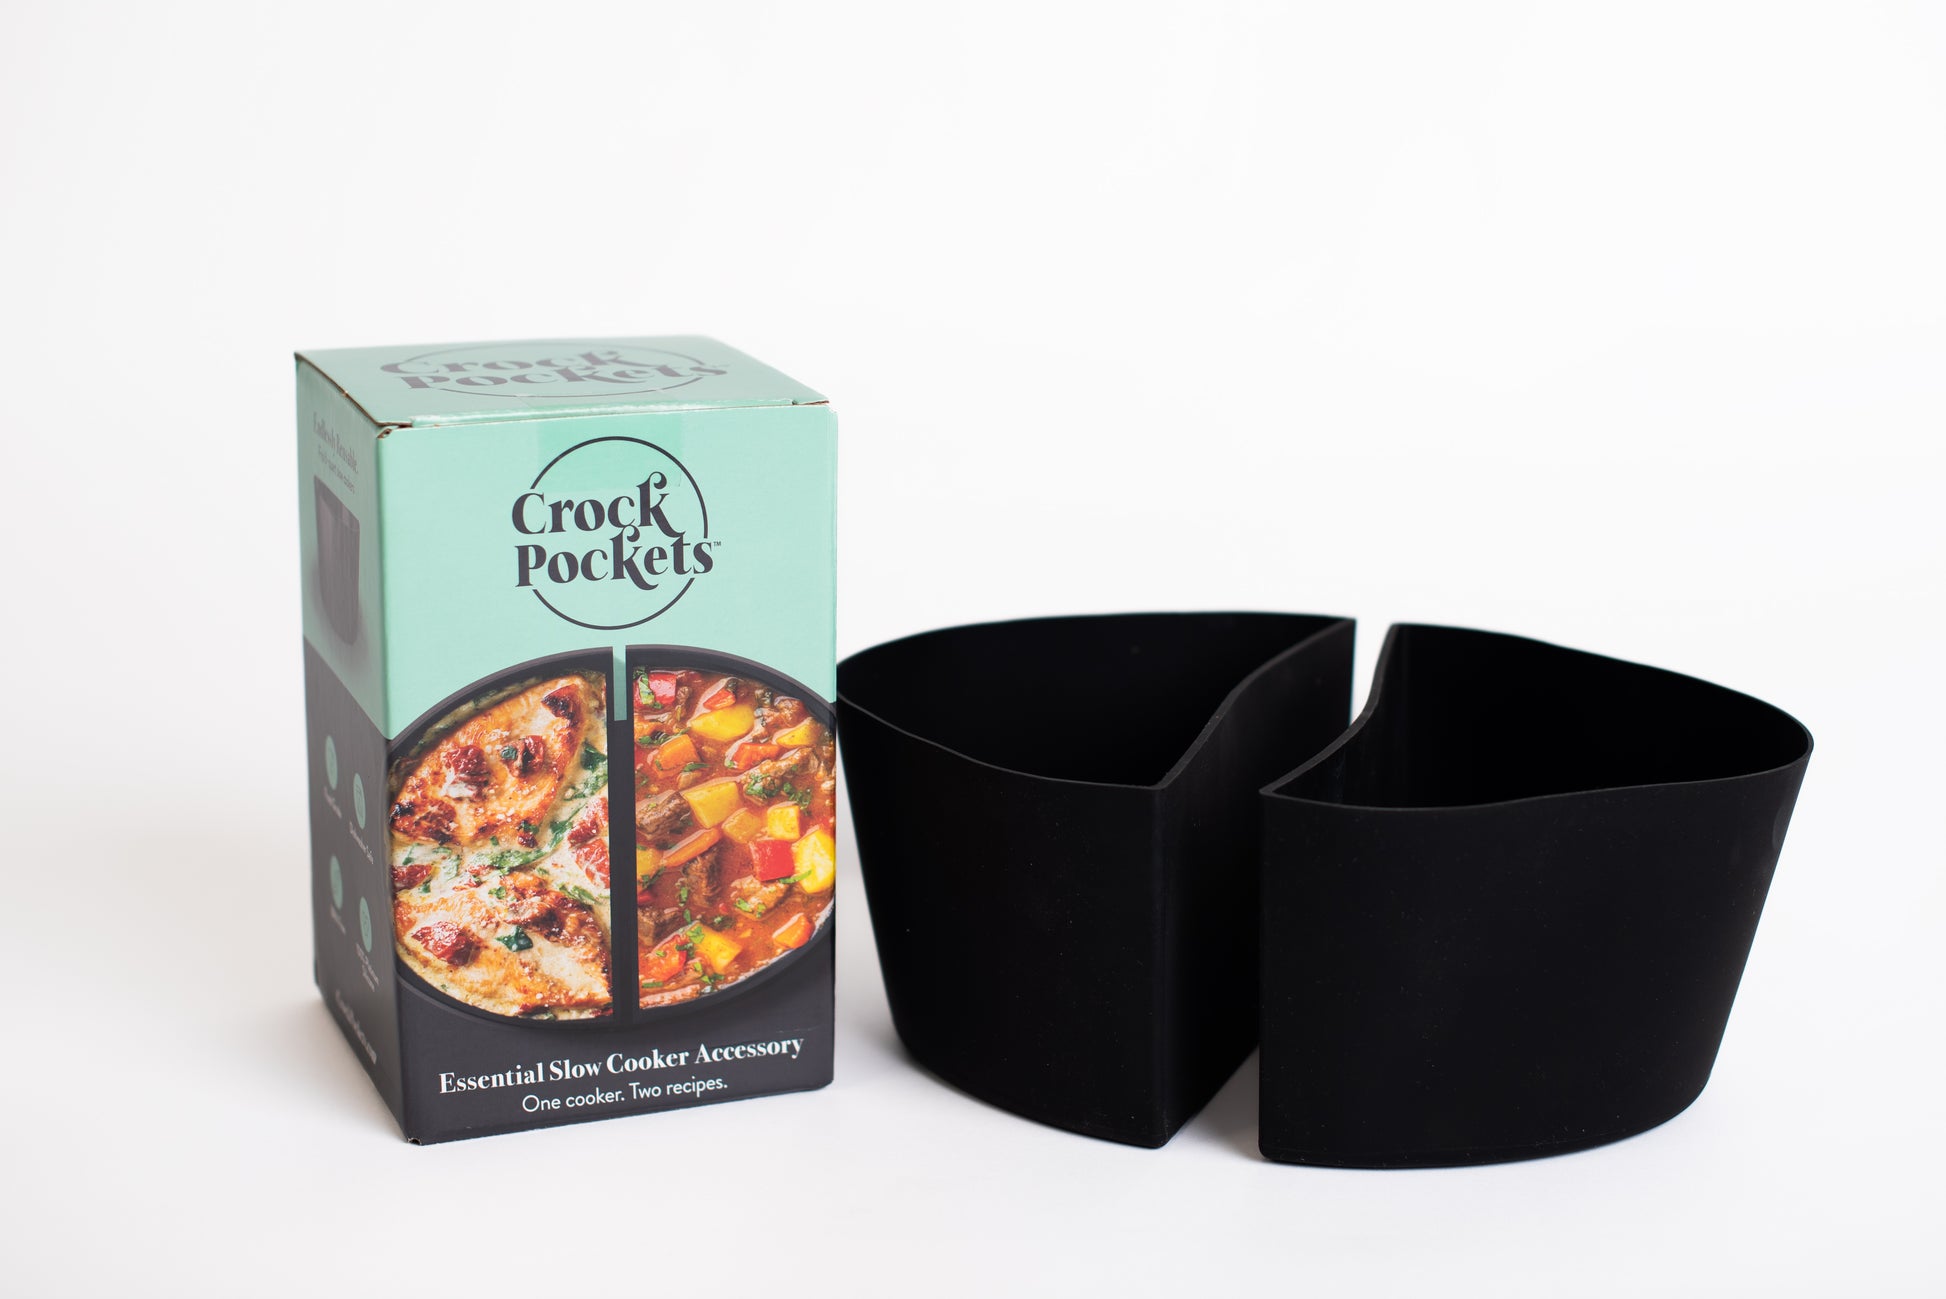 CrockPockets silicone divider next to its packaging